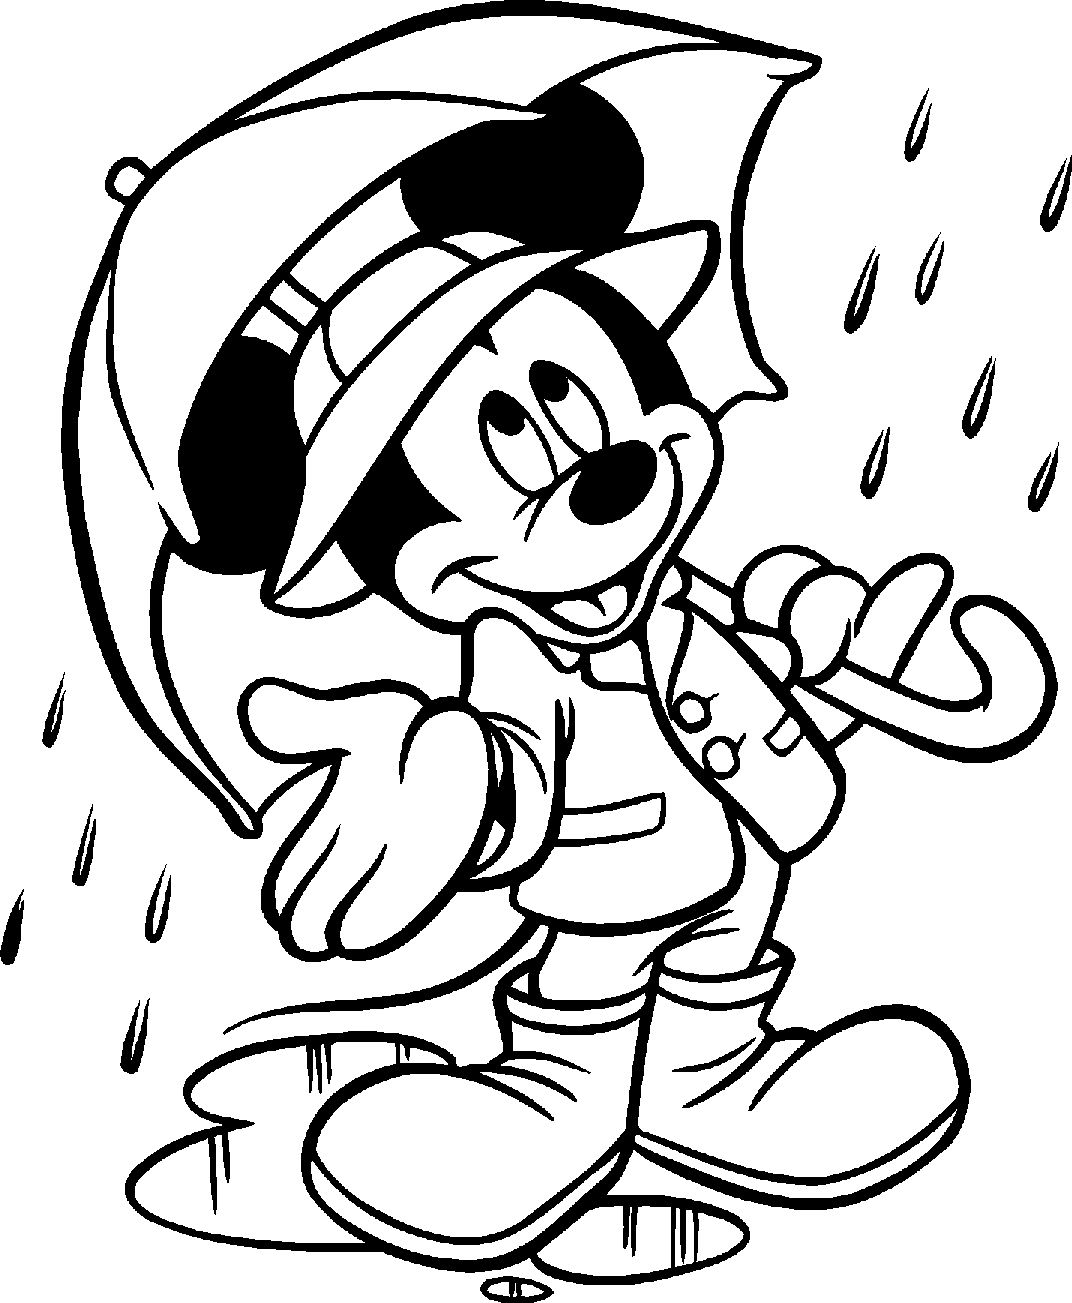 Free Custom Coloring Pages Coloring Ideas Fresh My Custom Coloring Of Minni Mouse Free Book